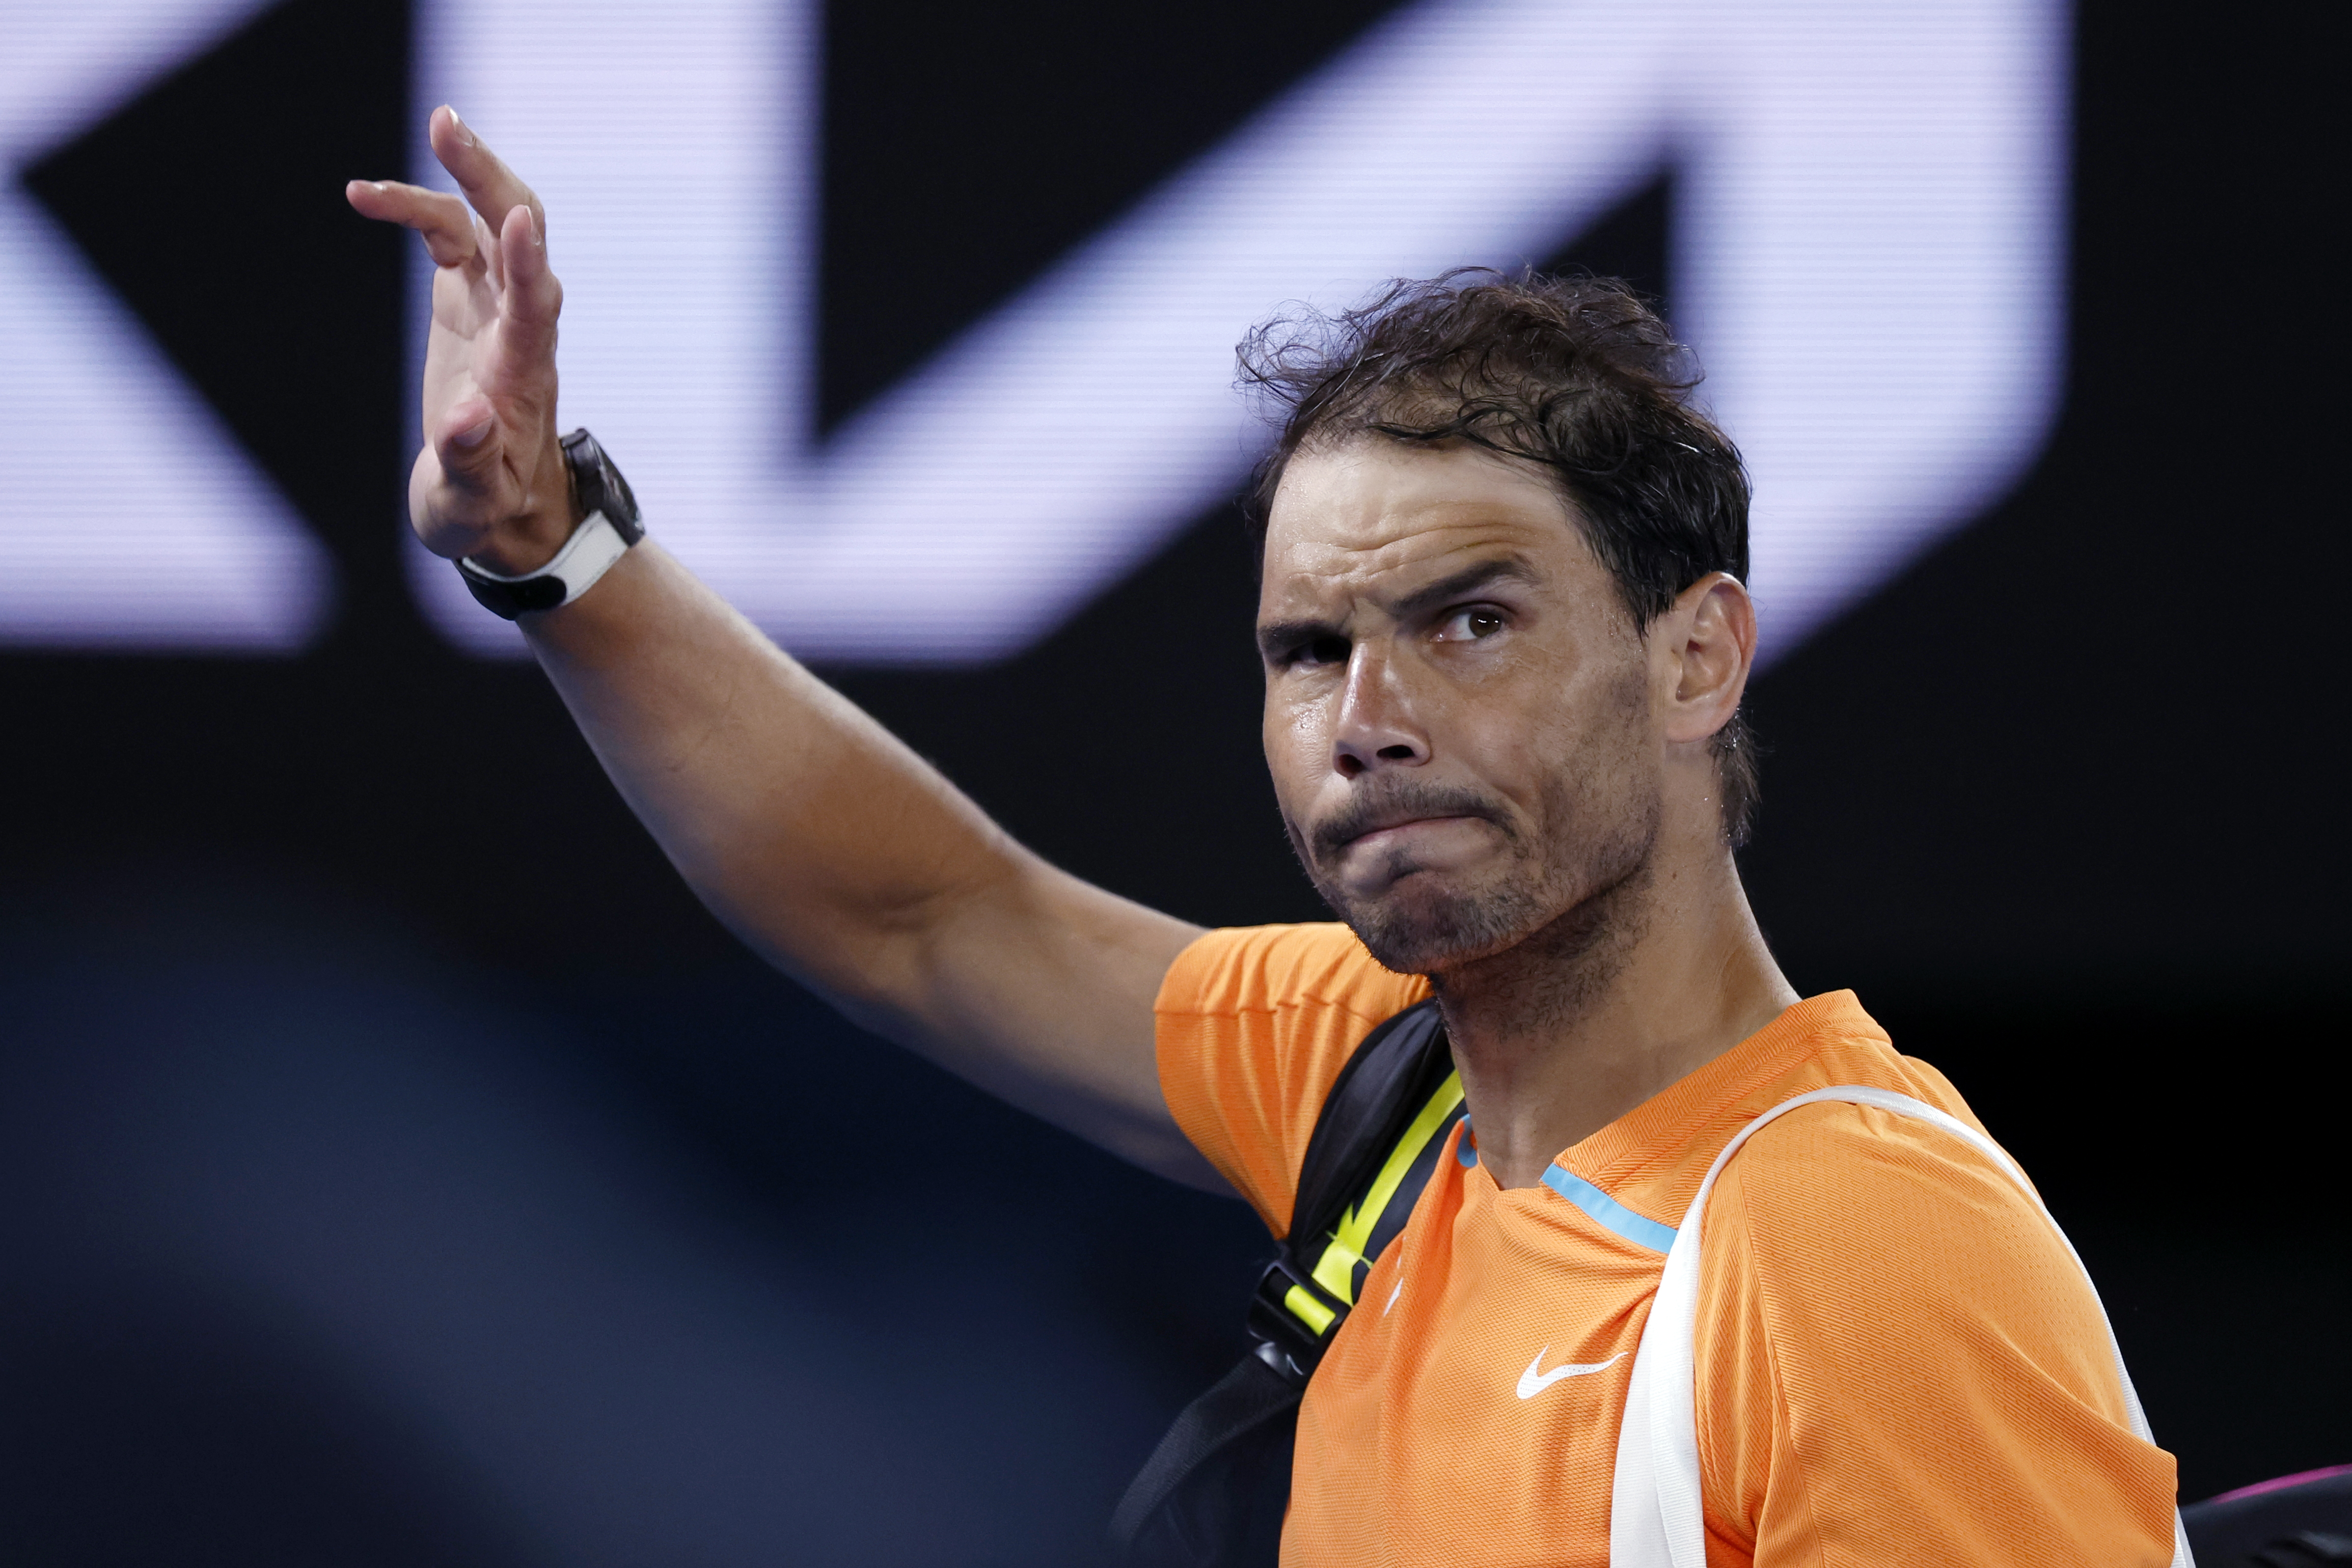 ATP Rankings: Rafael Nadal in danger of losing Top 10 spot in ATP Rankings, drops to lowest ranking since 2007 - Check Out 